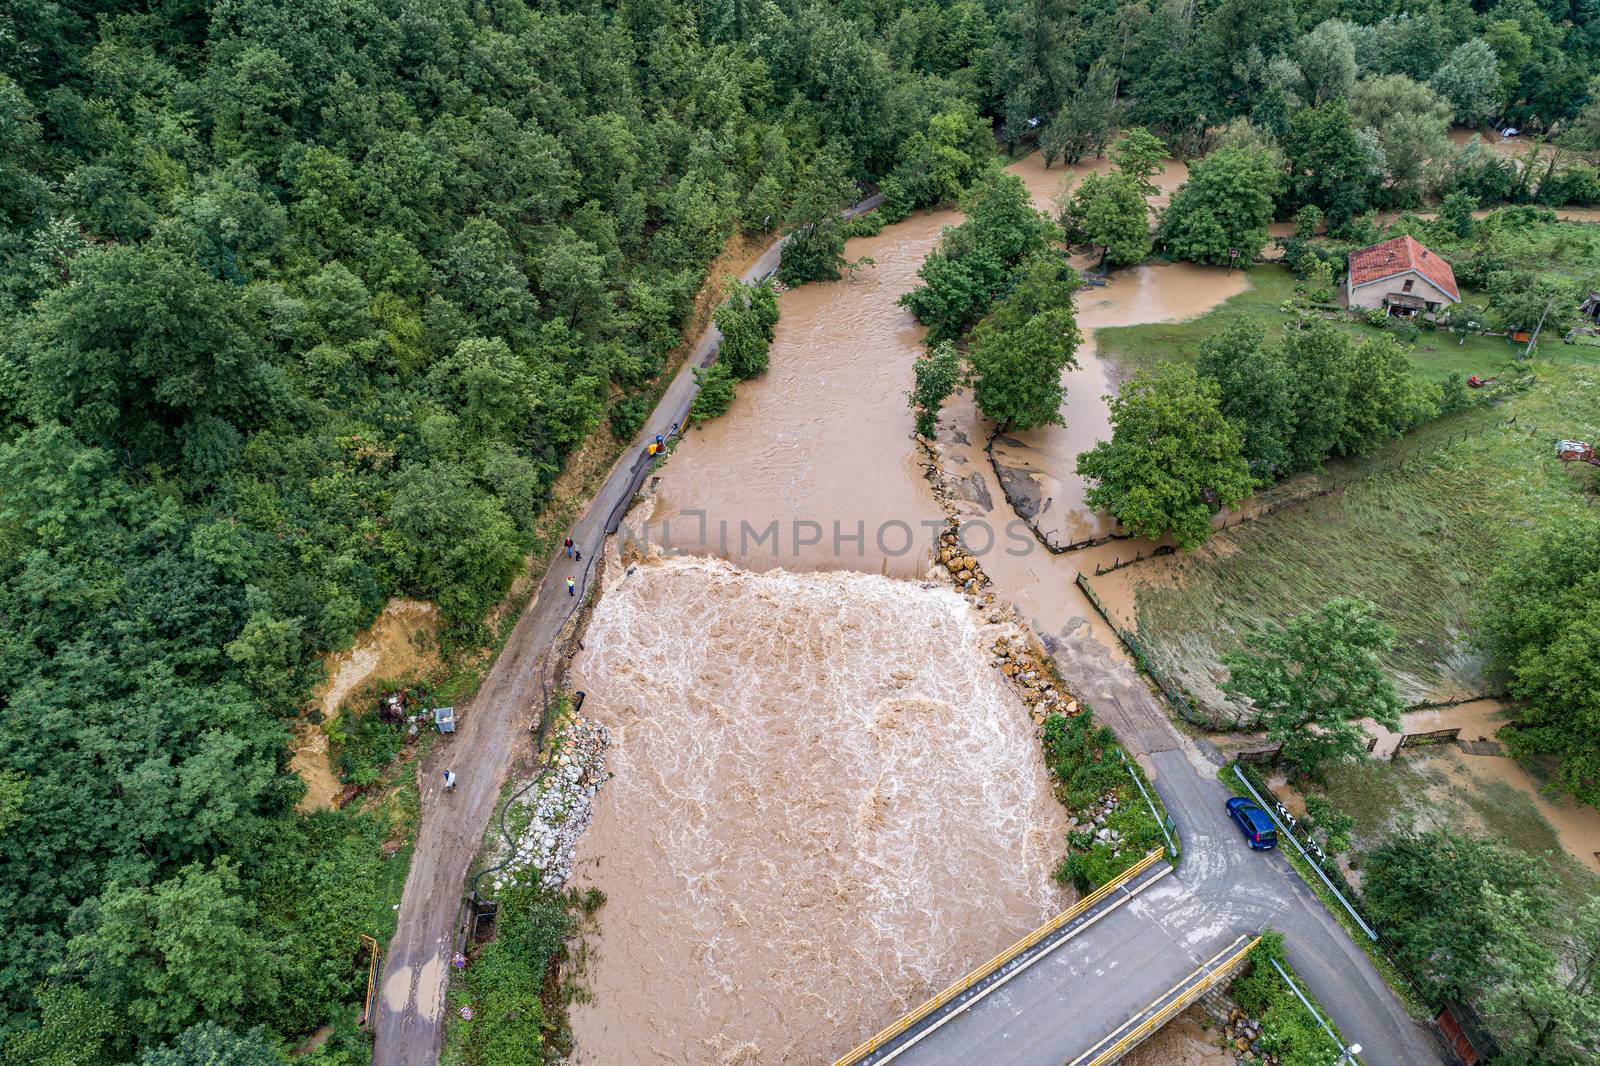 A river that overflows threatens the road bridge and property by adamr